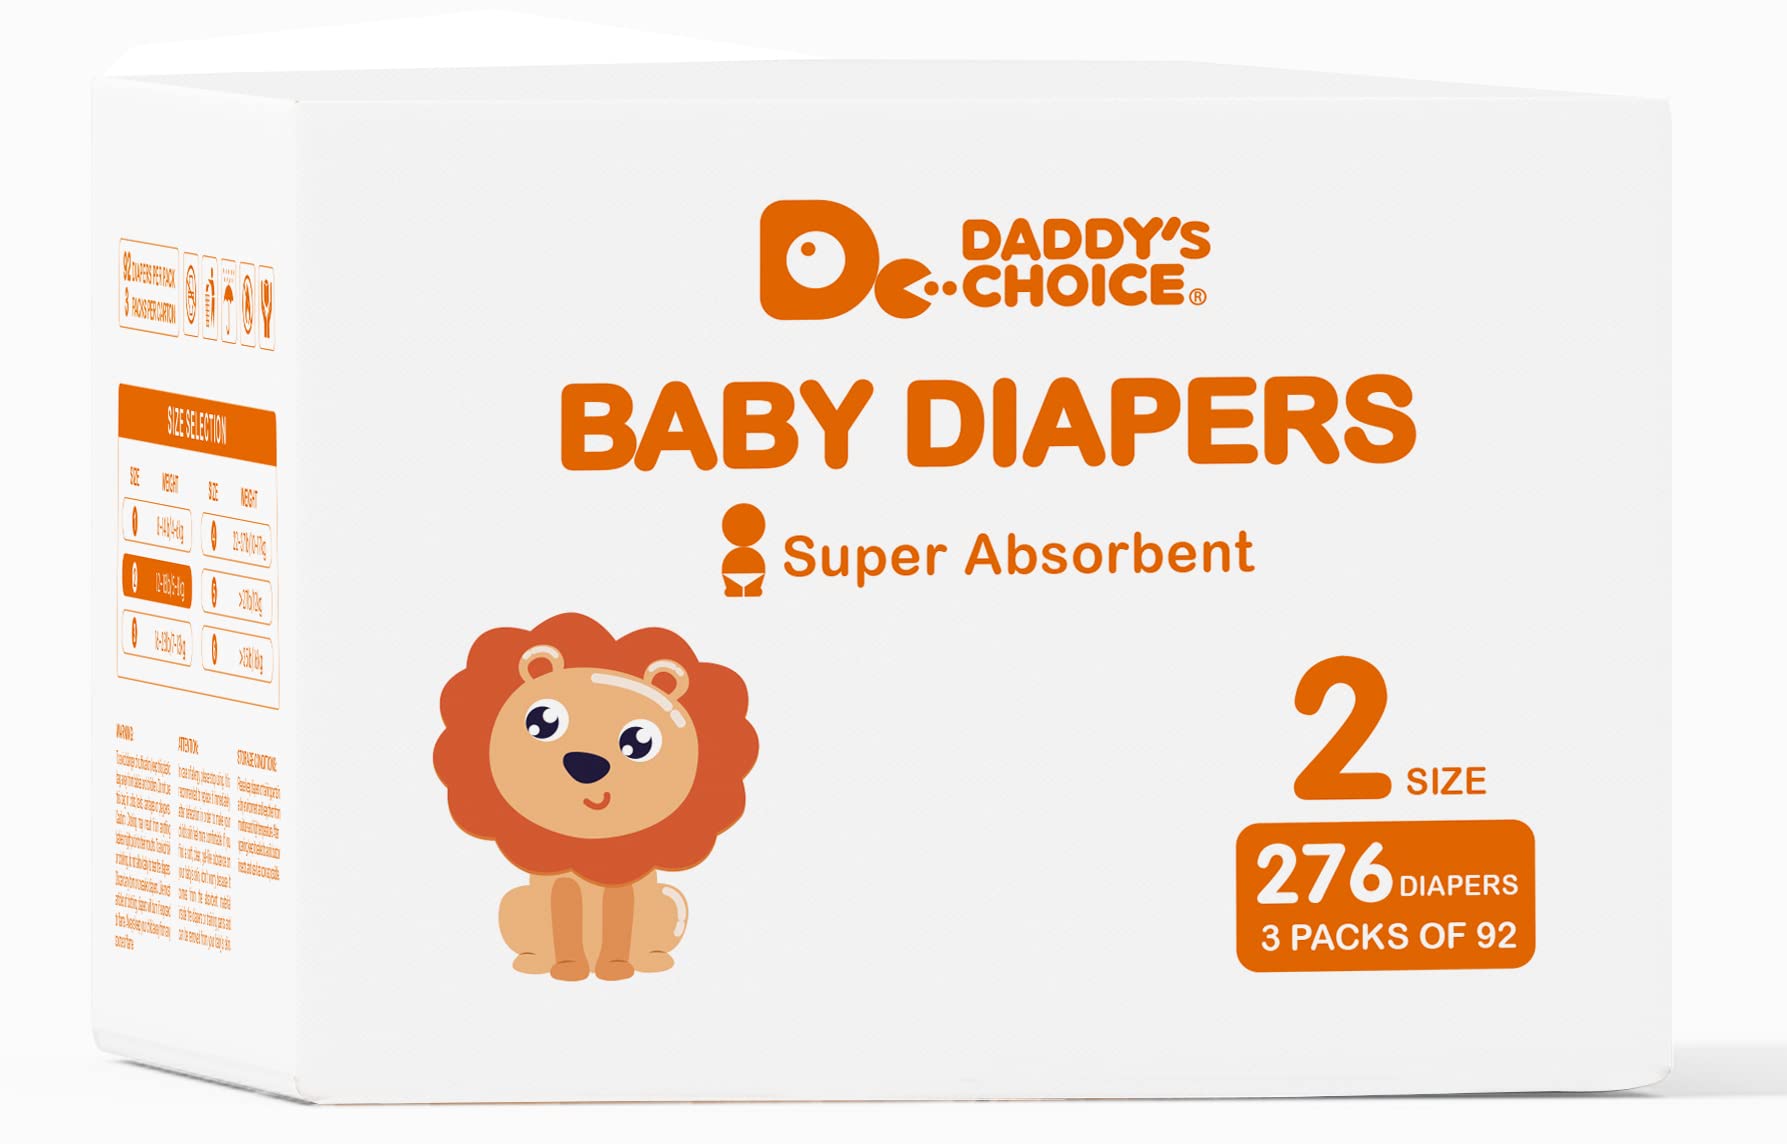 dady 1 pampers